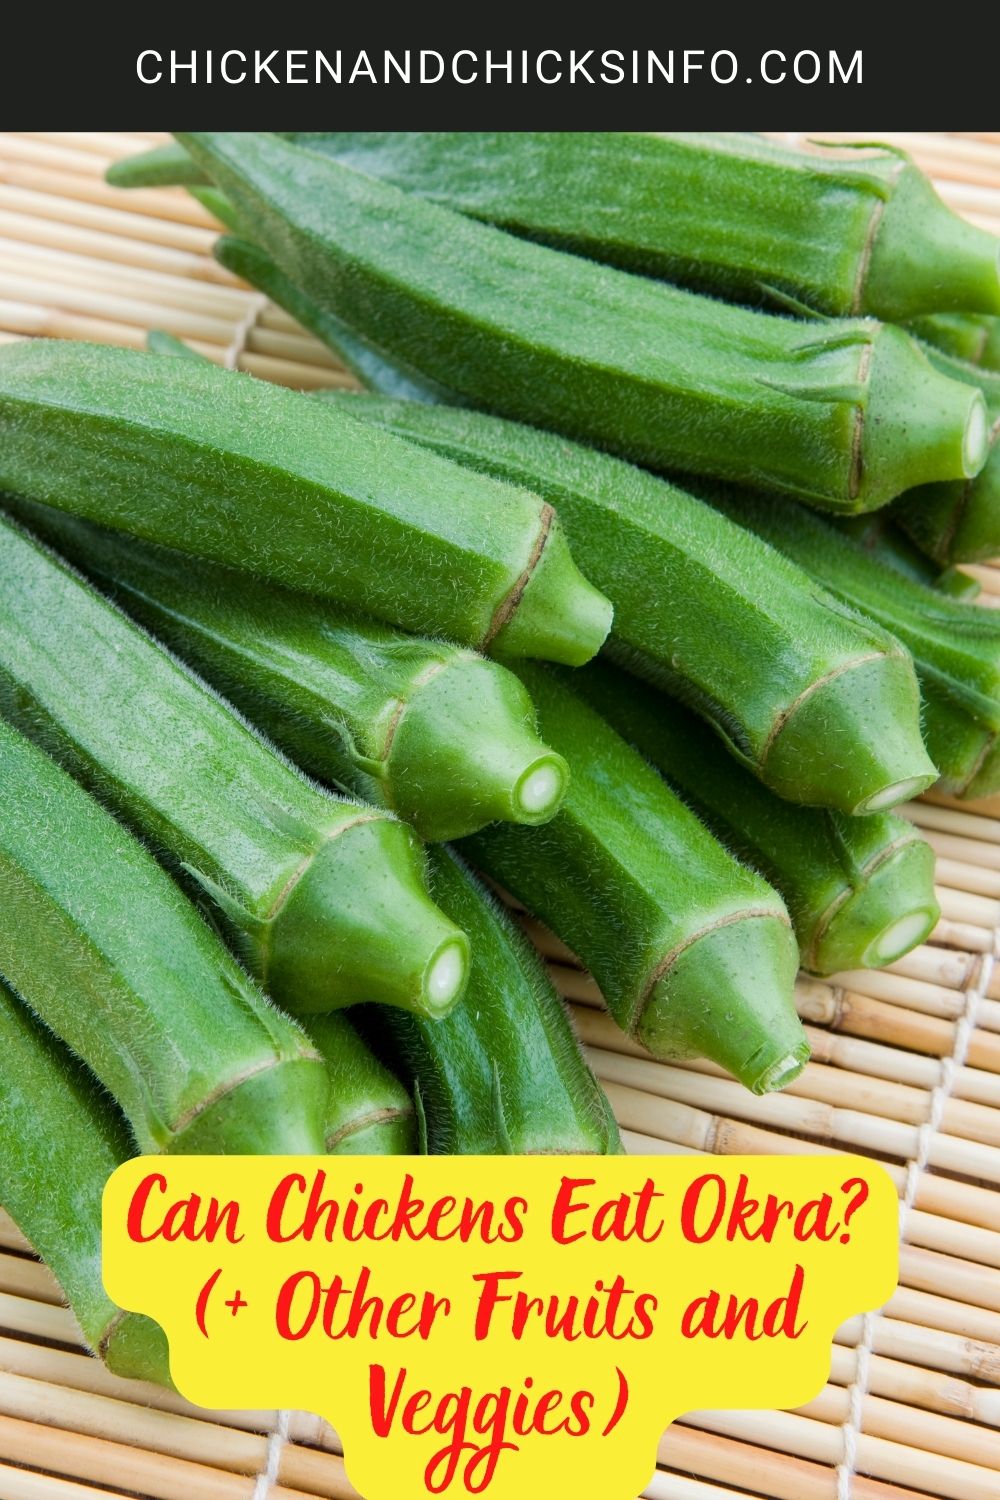 Can Chickens Eat Okra? (+ Other Fruits and Veggies) poster.
